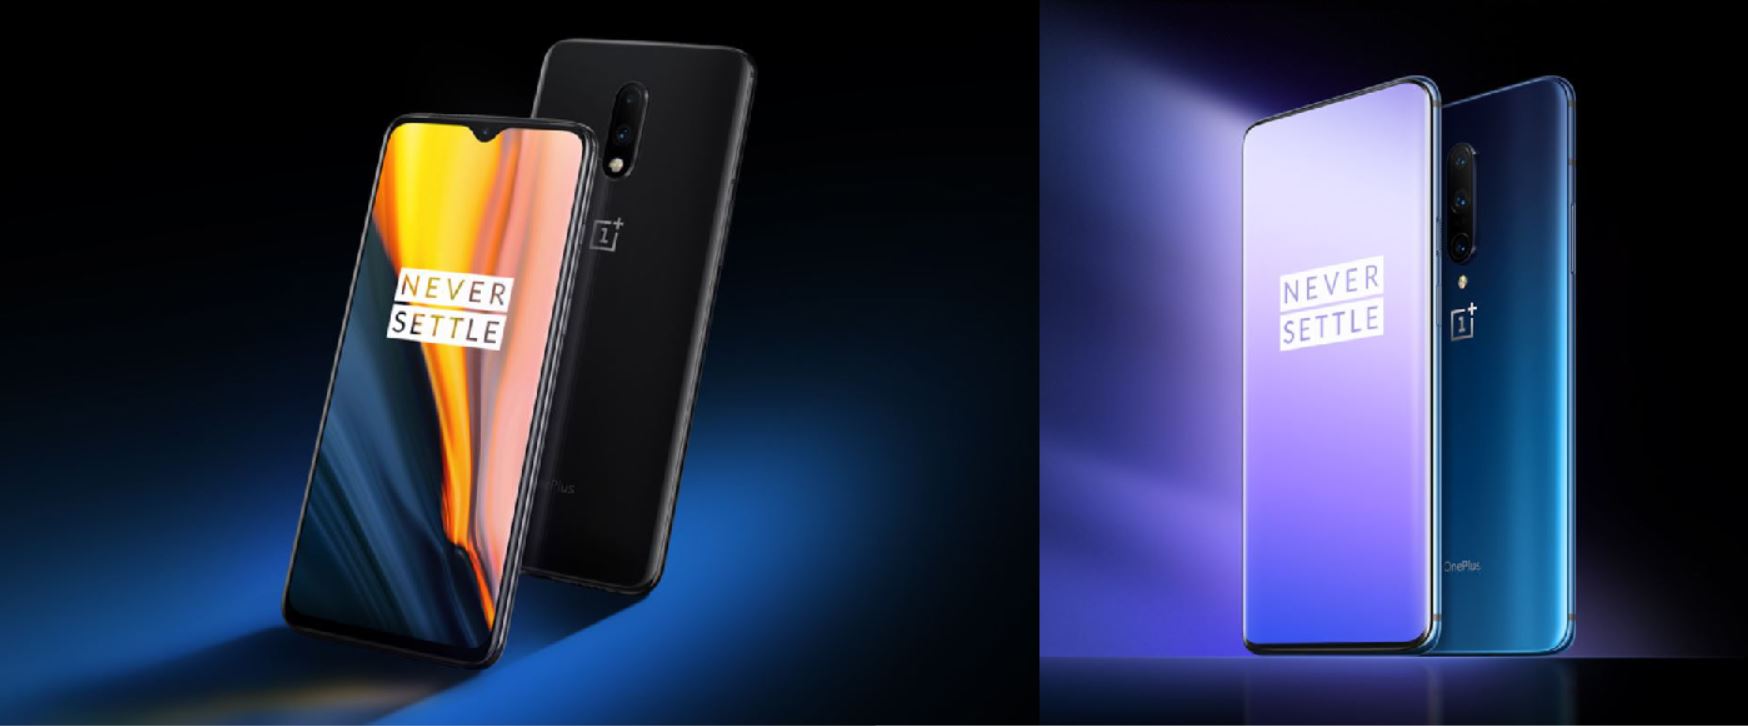 OnePlus 7 and OnePlus 7 Pro Launched with Snapdragon 855, Flagship Grade Camera and More